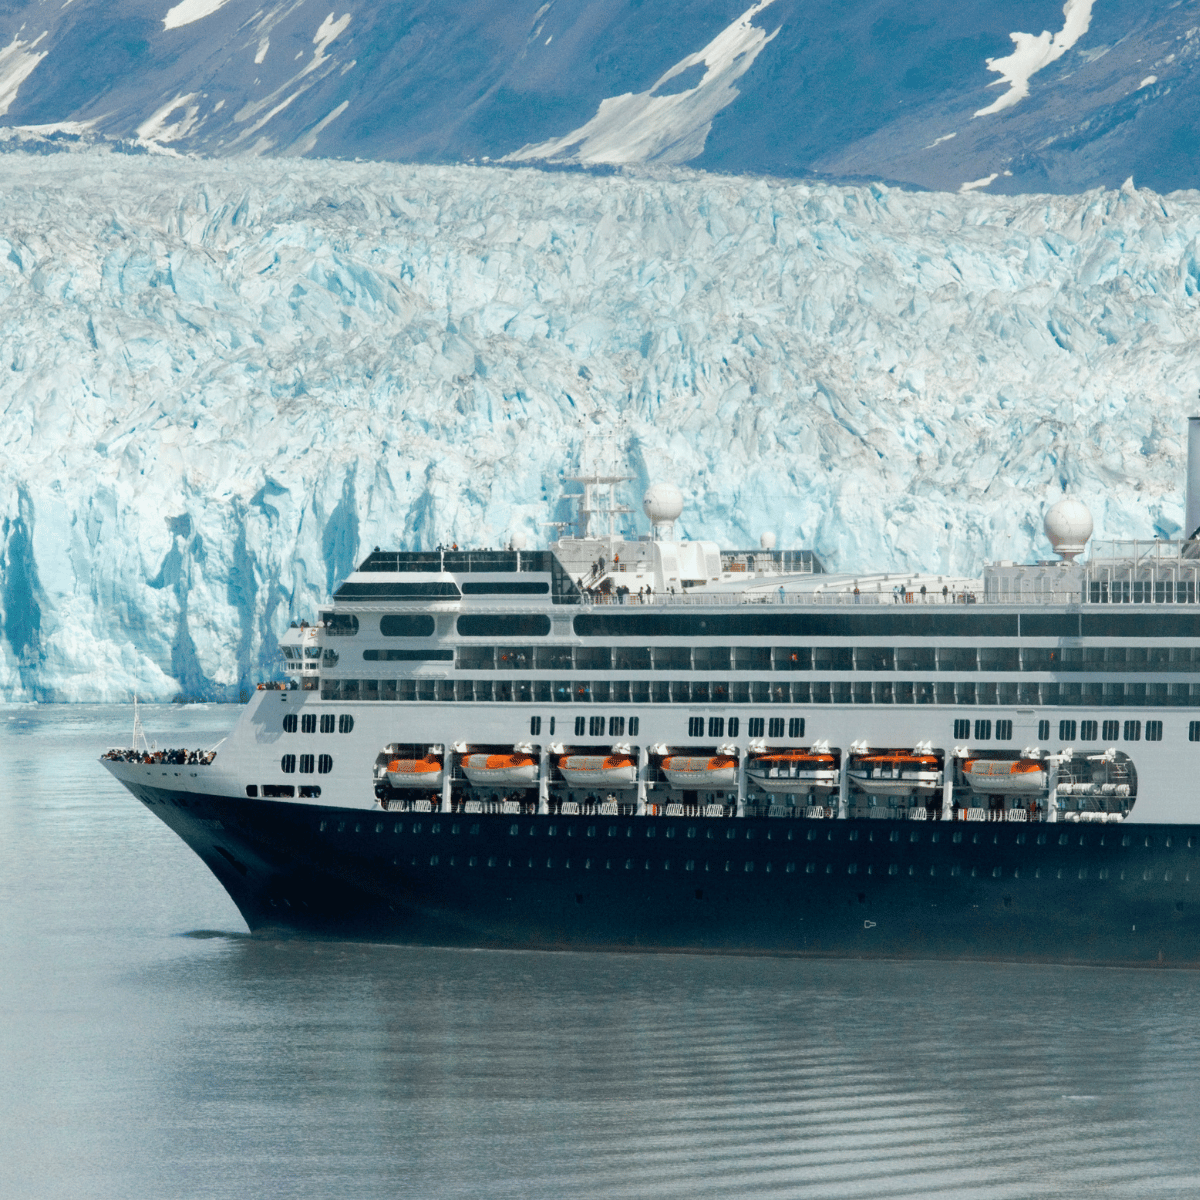 Cruise ship in front of glacier